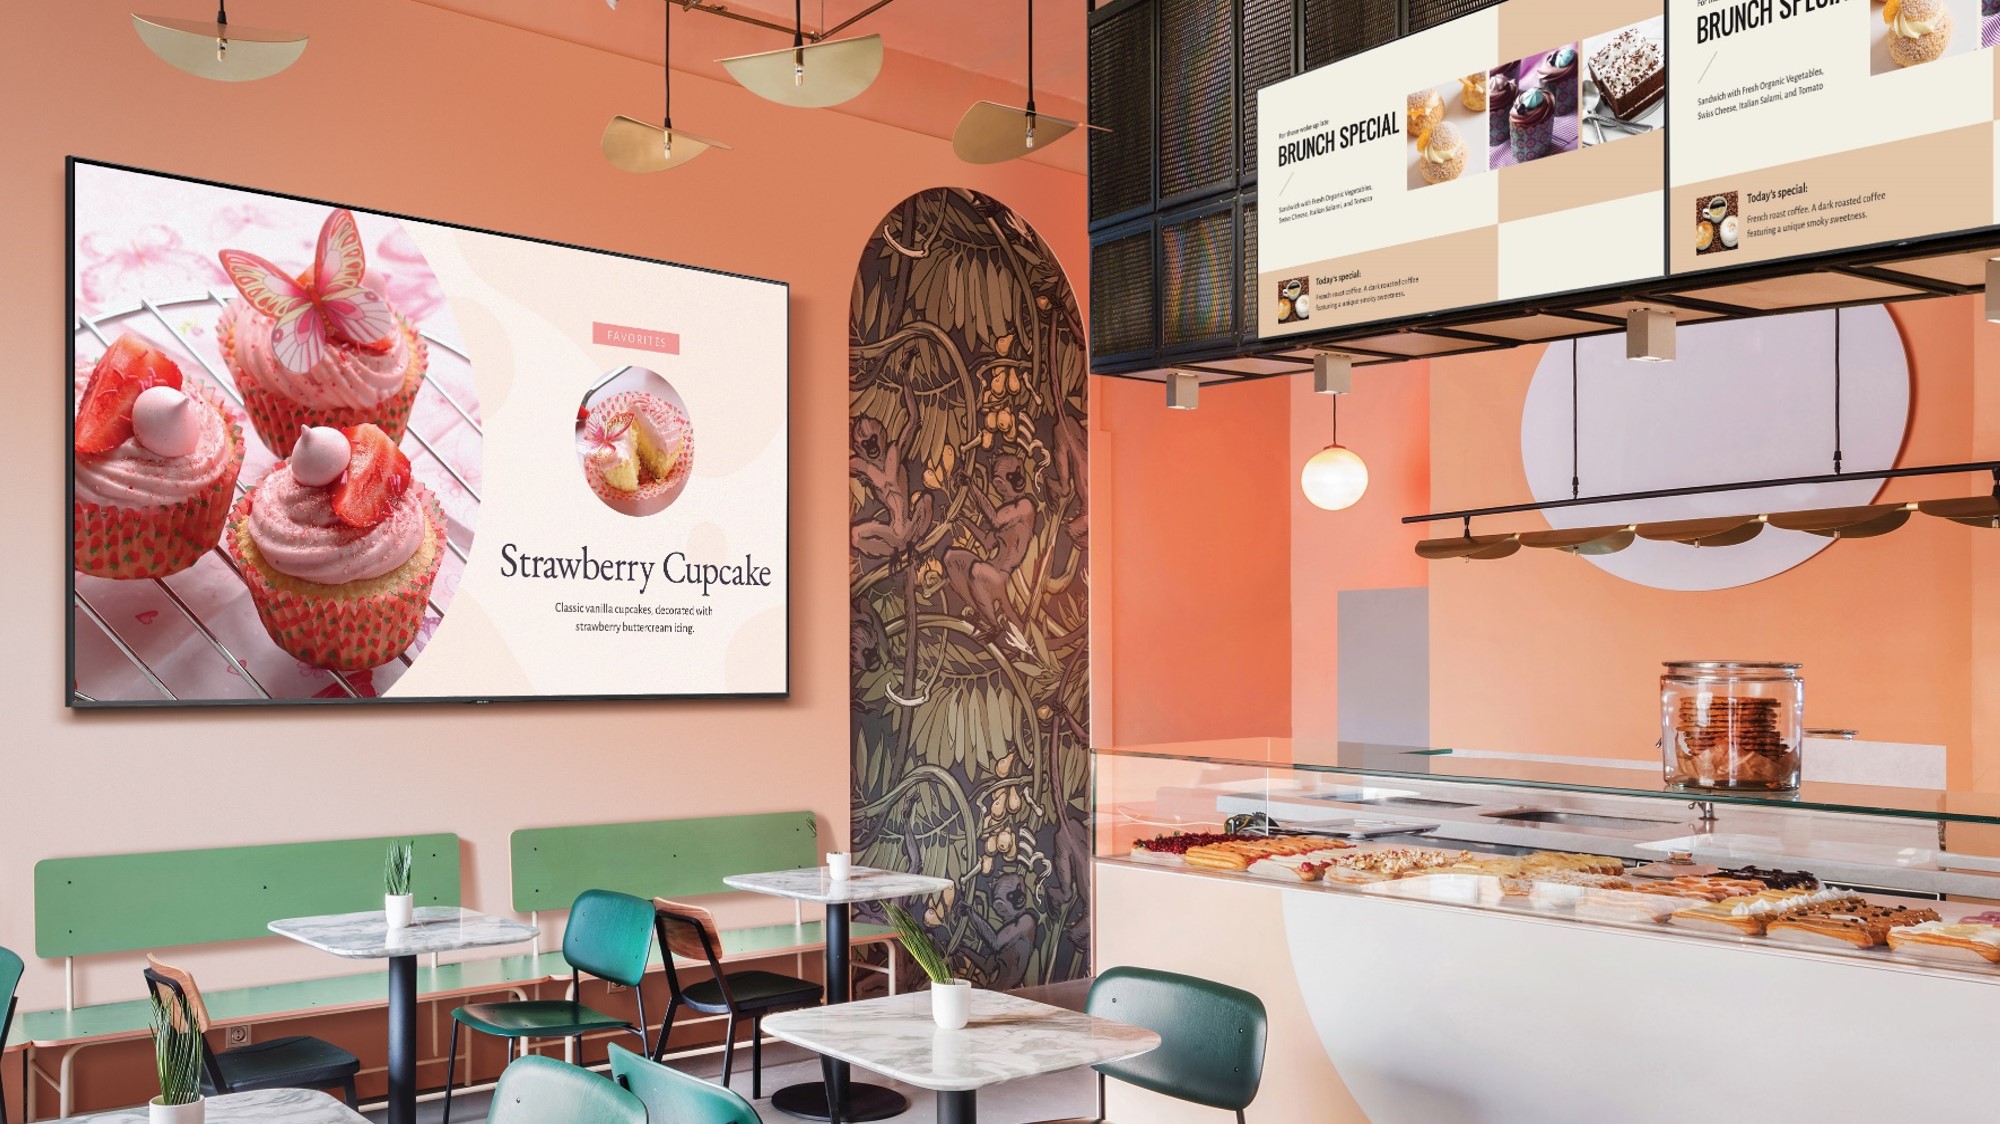 digital signage on screens featuring pastries inside empty restaurant